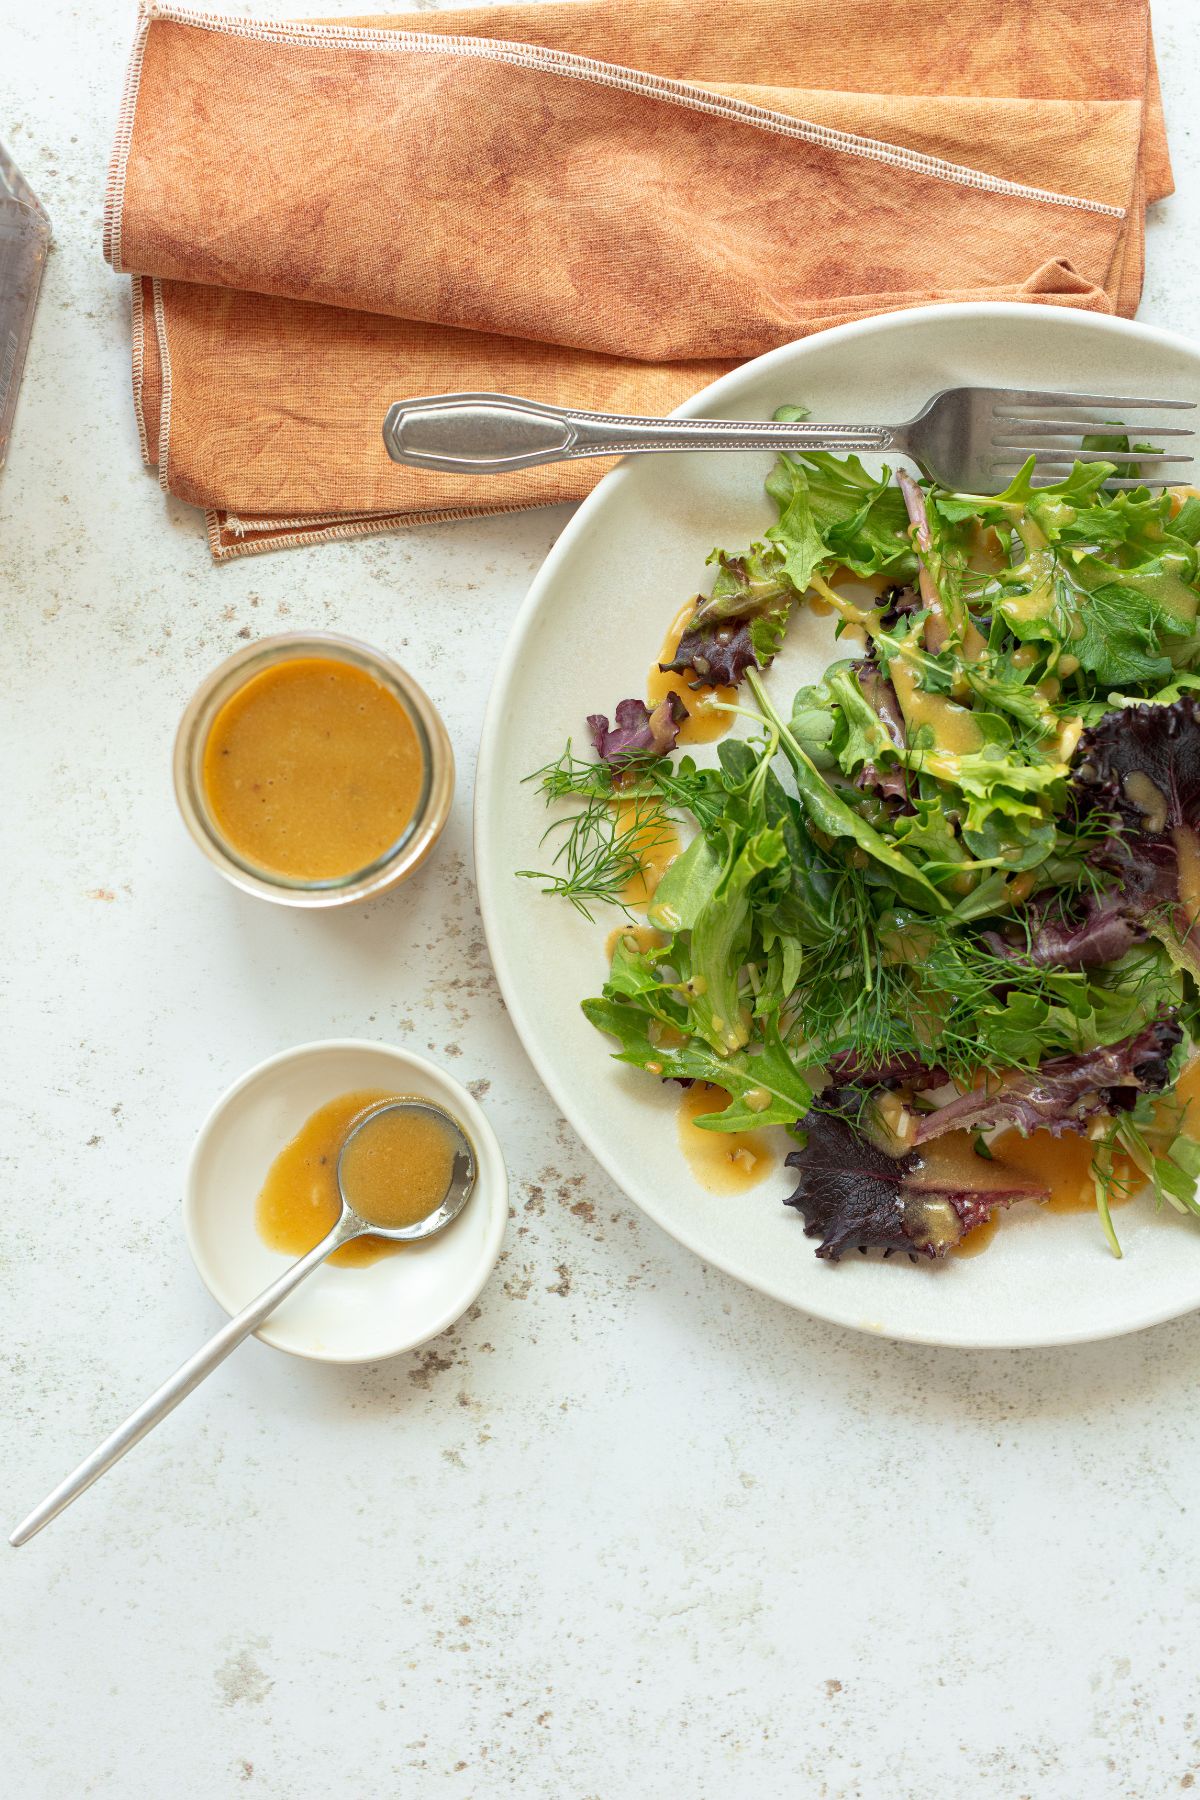 Adding dressing to a fresh green salad on a plate.